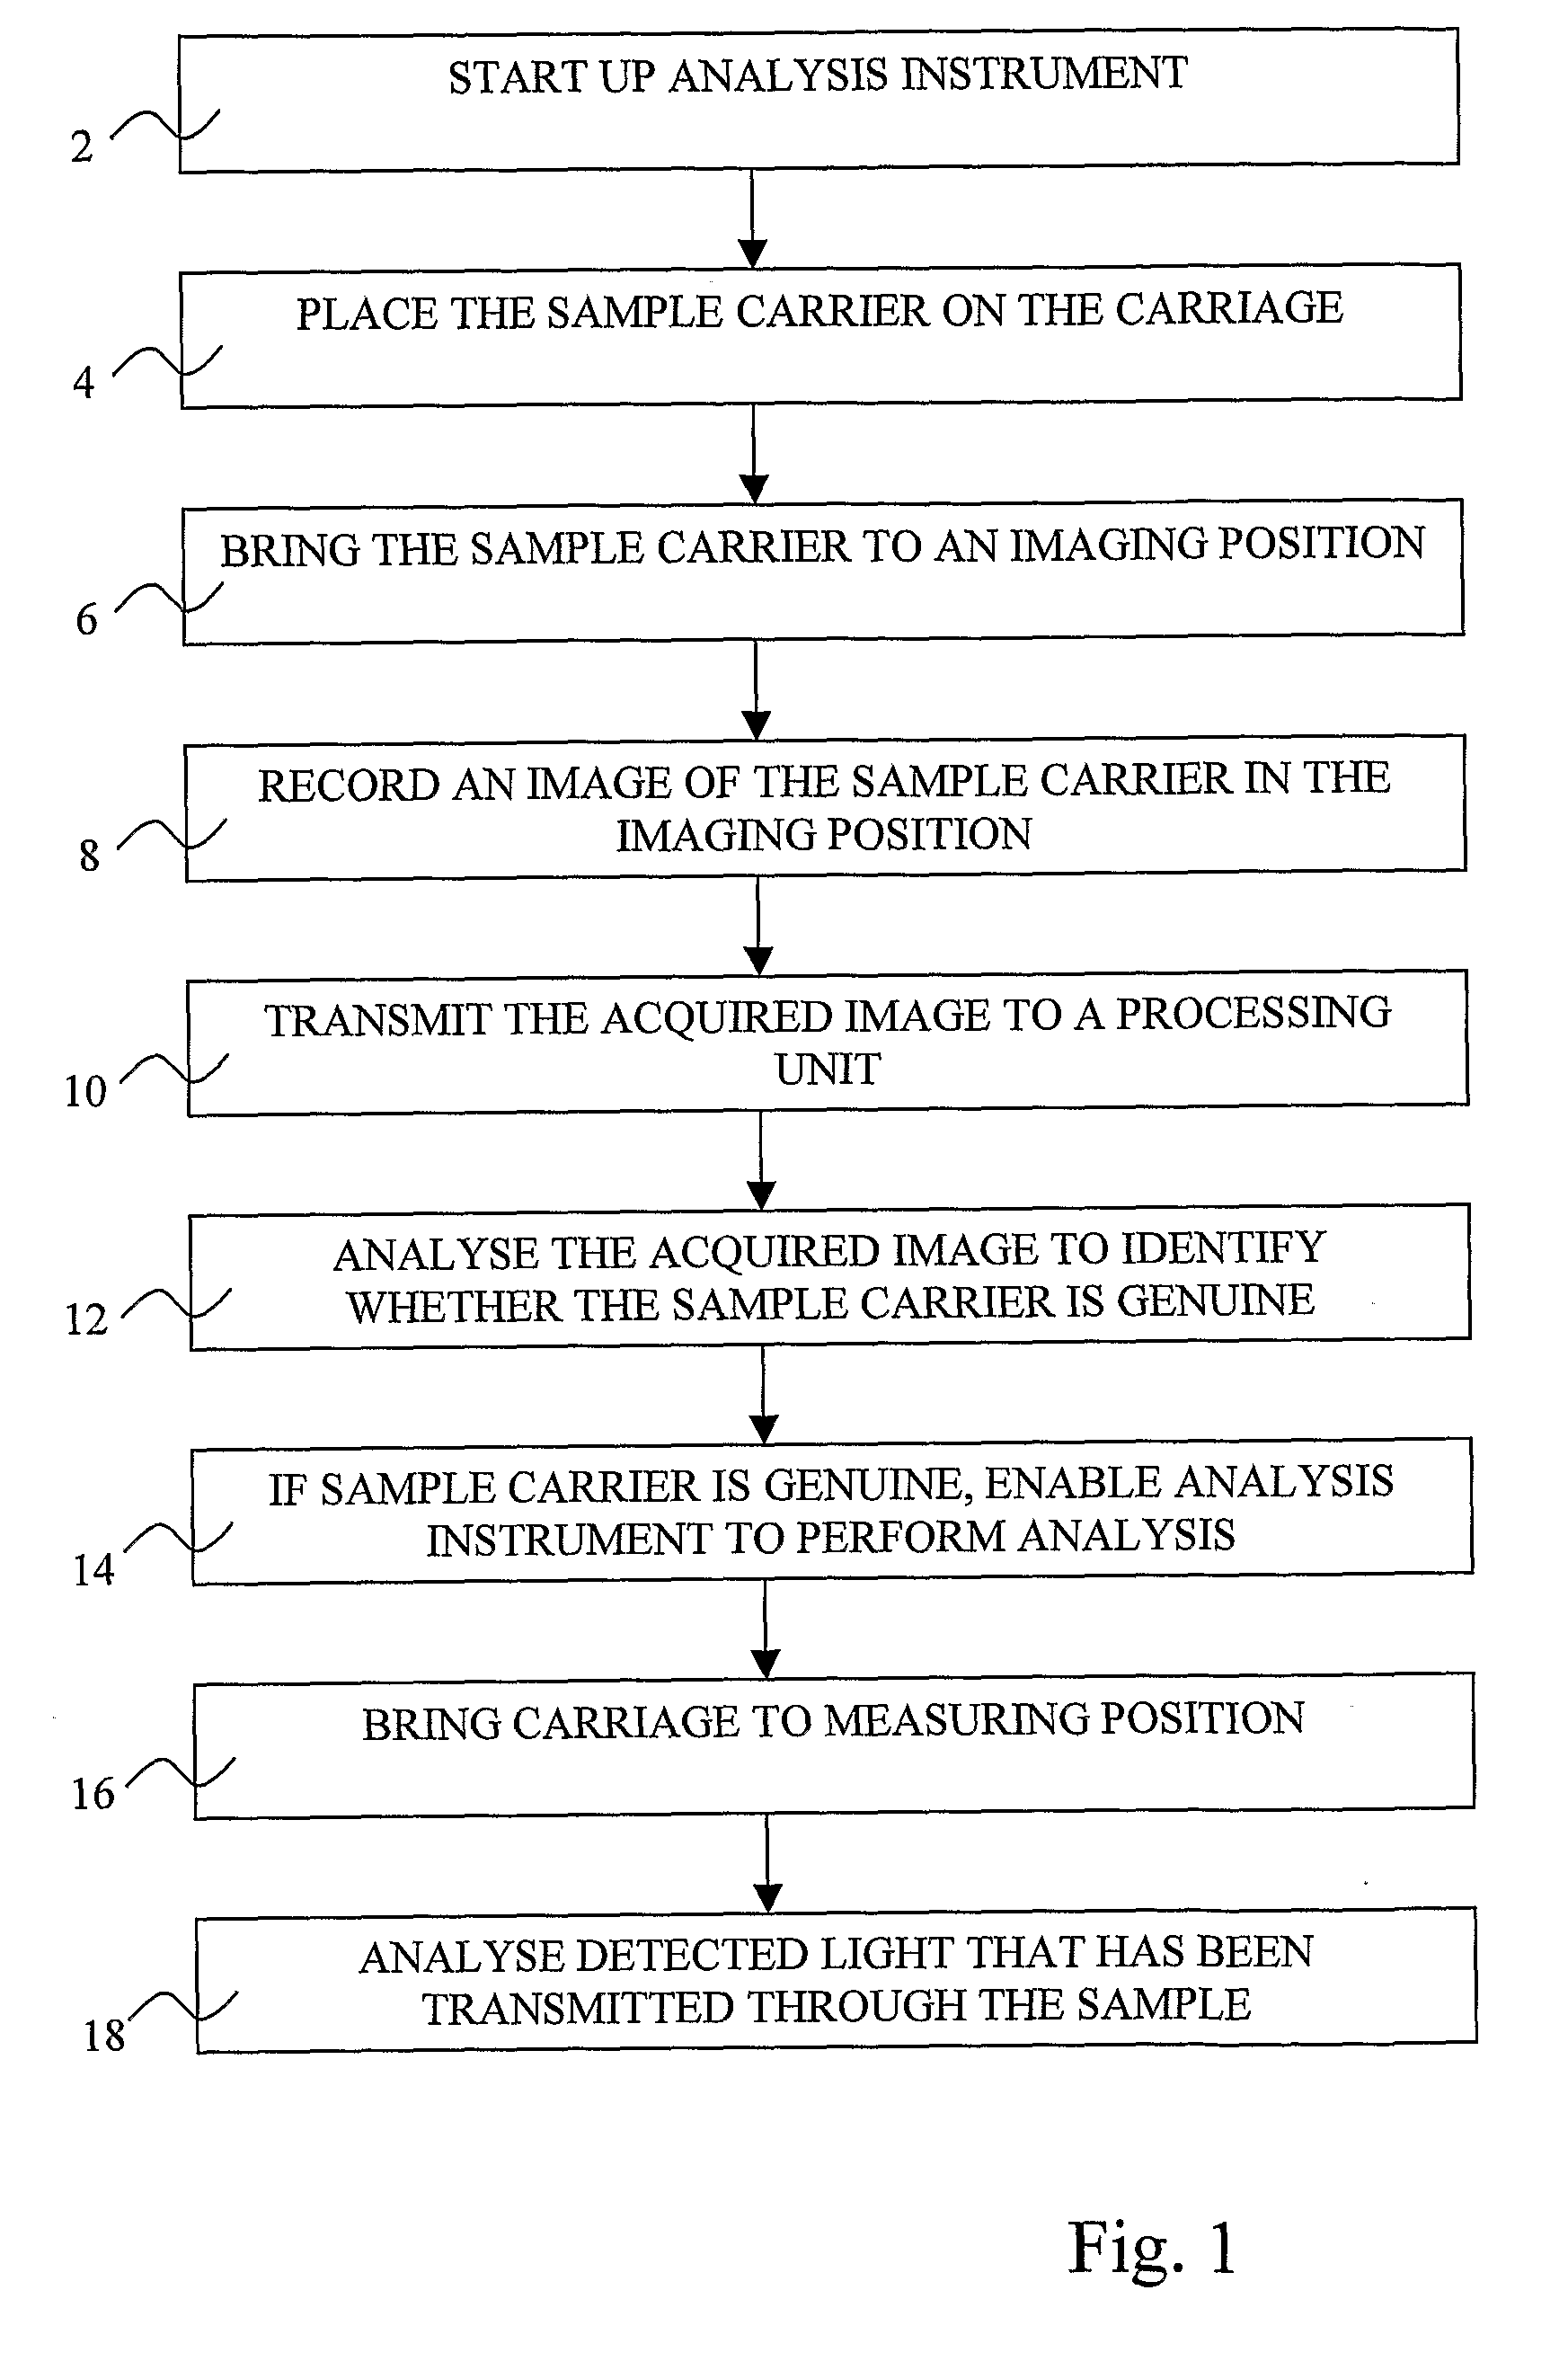 Method For Ensuring Quality of a Sample Carrier